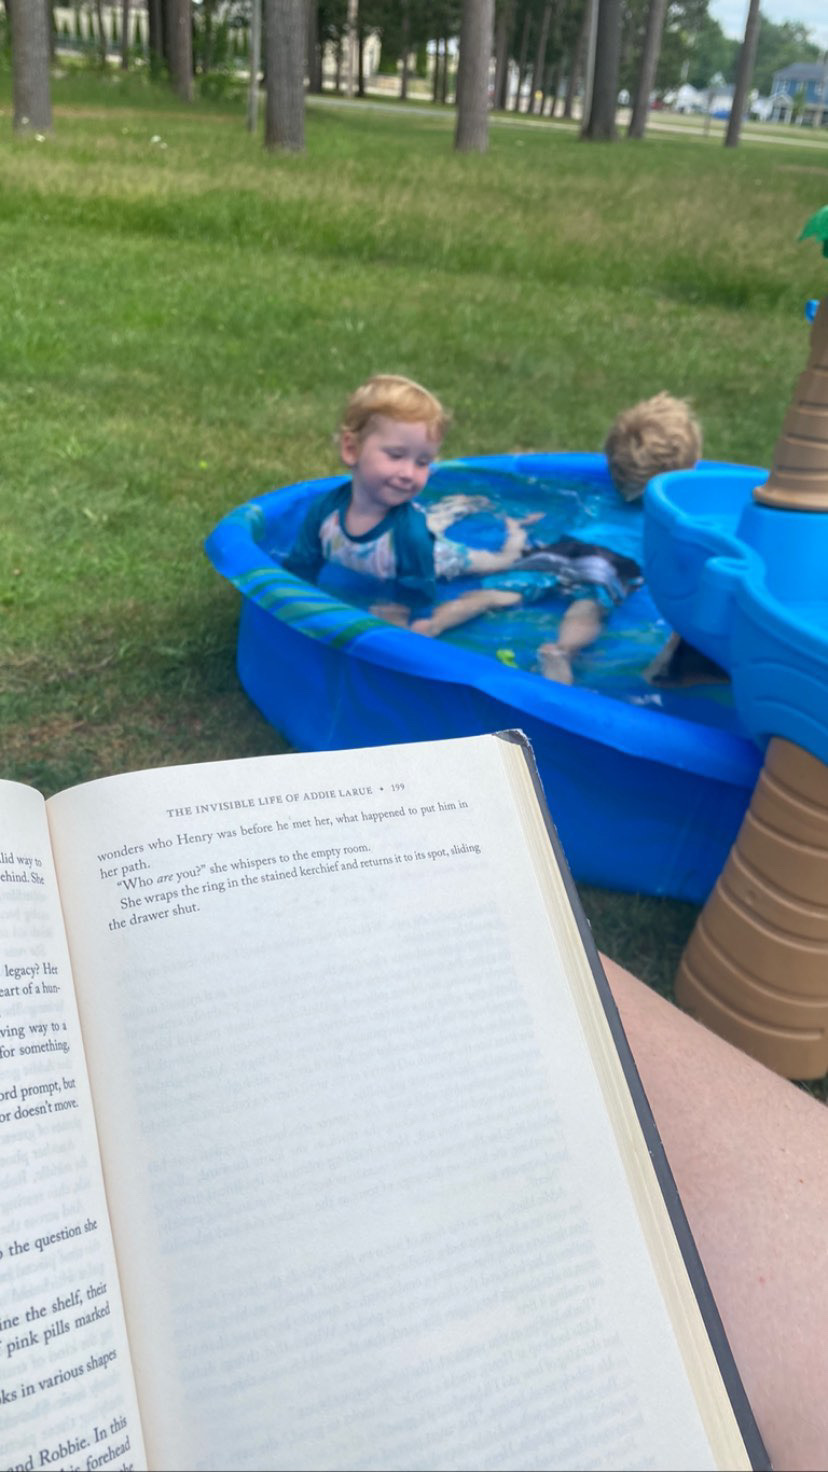 Page of a book while boys swim in pool